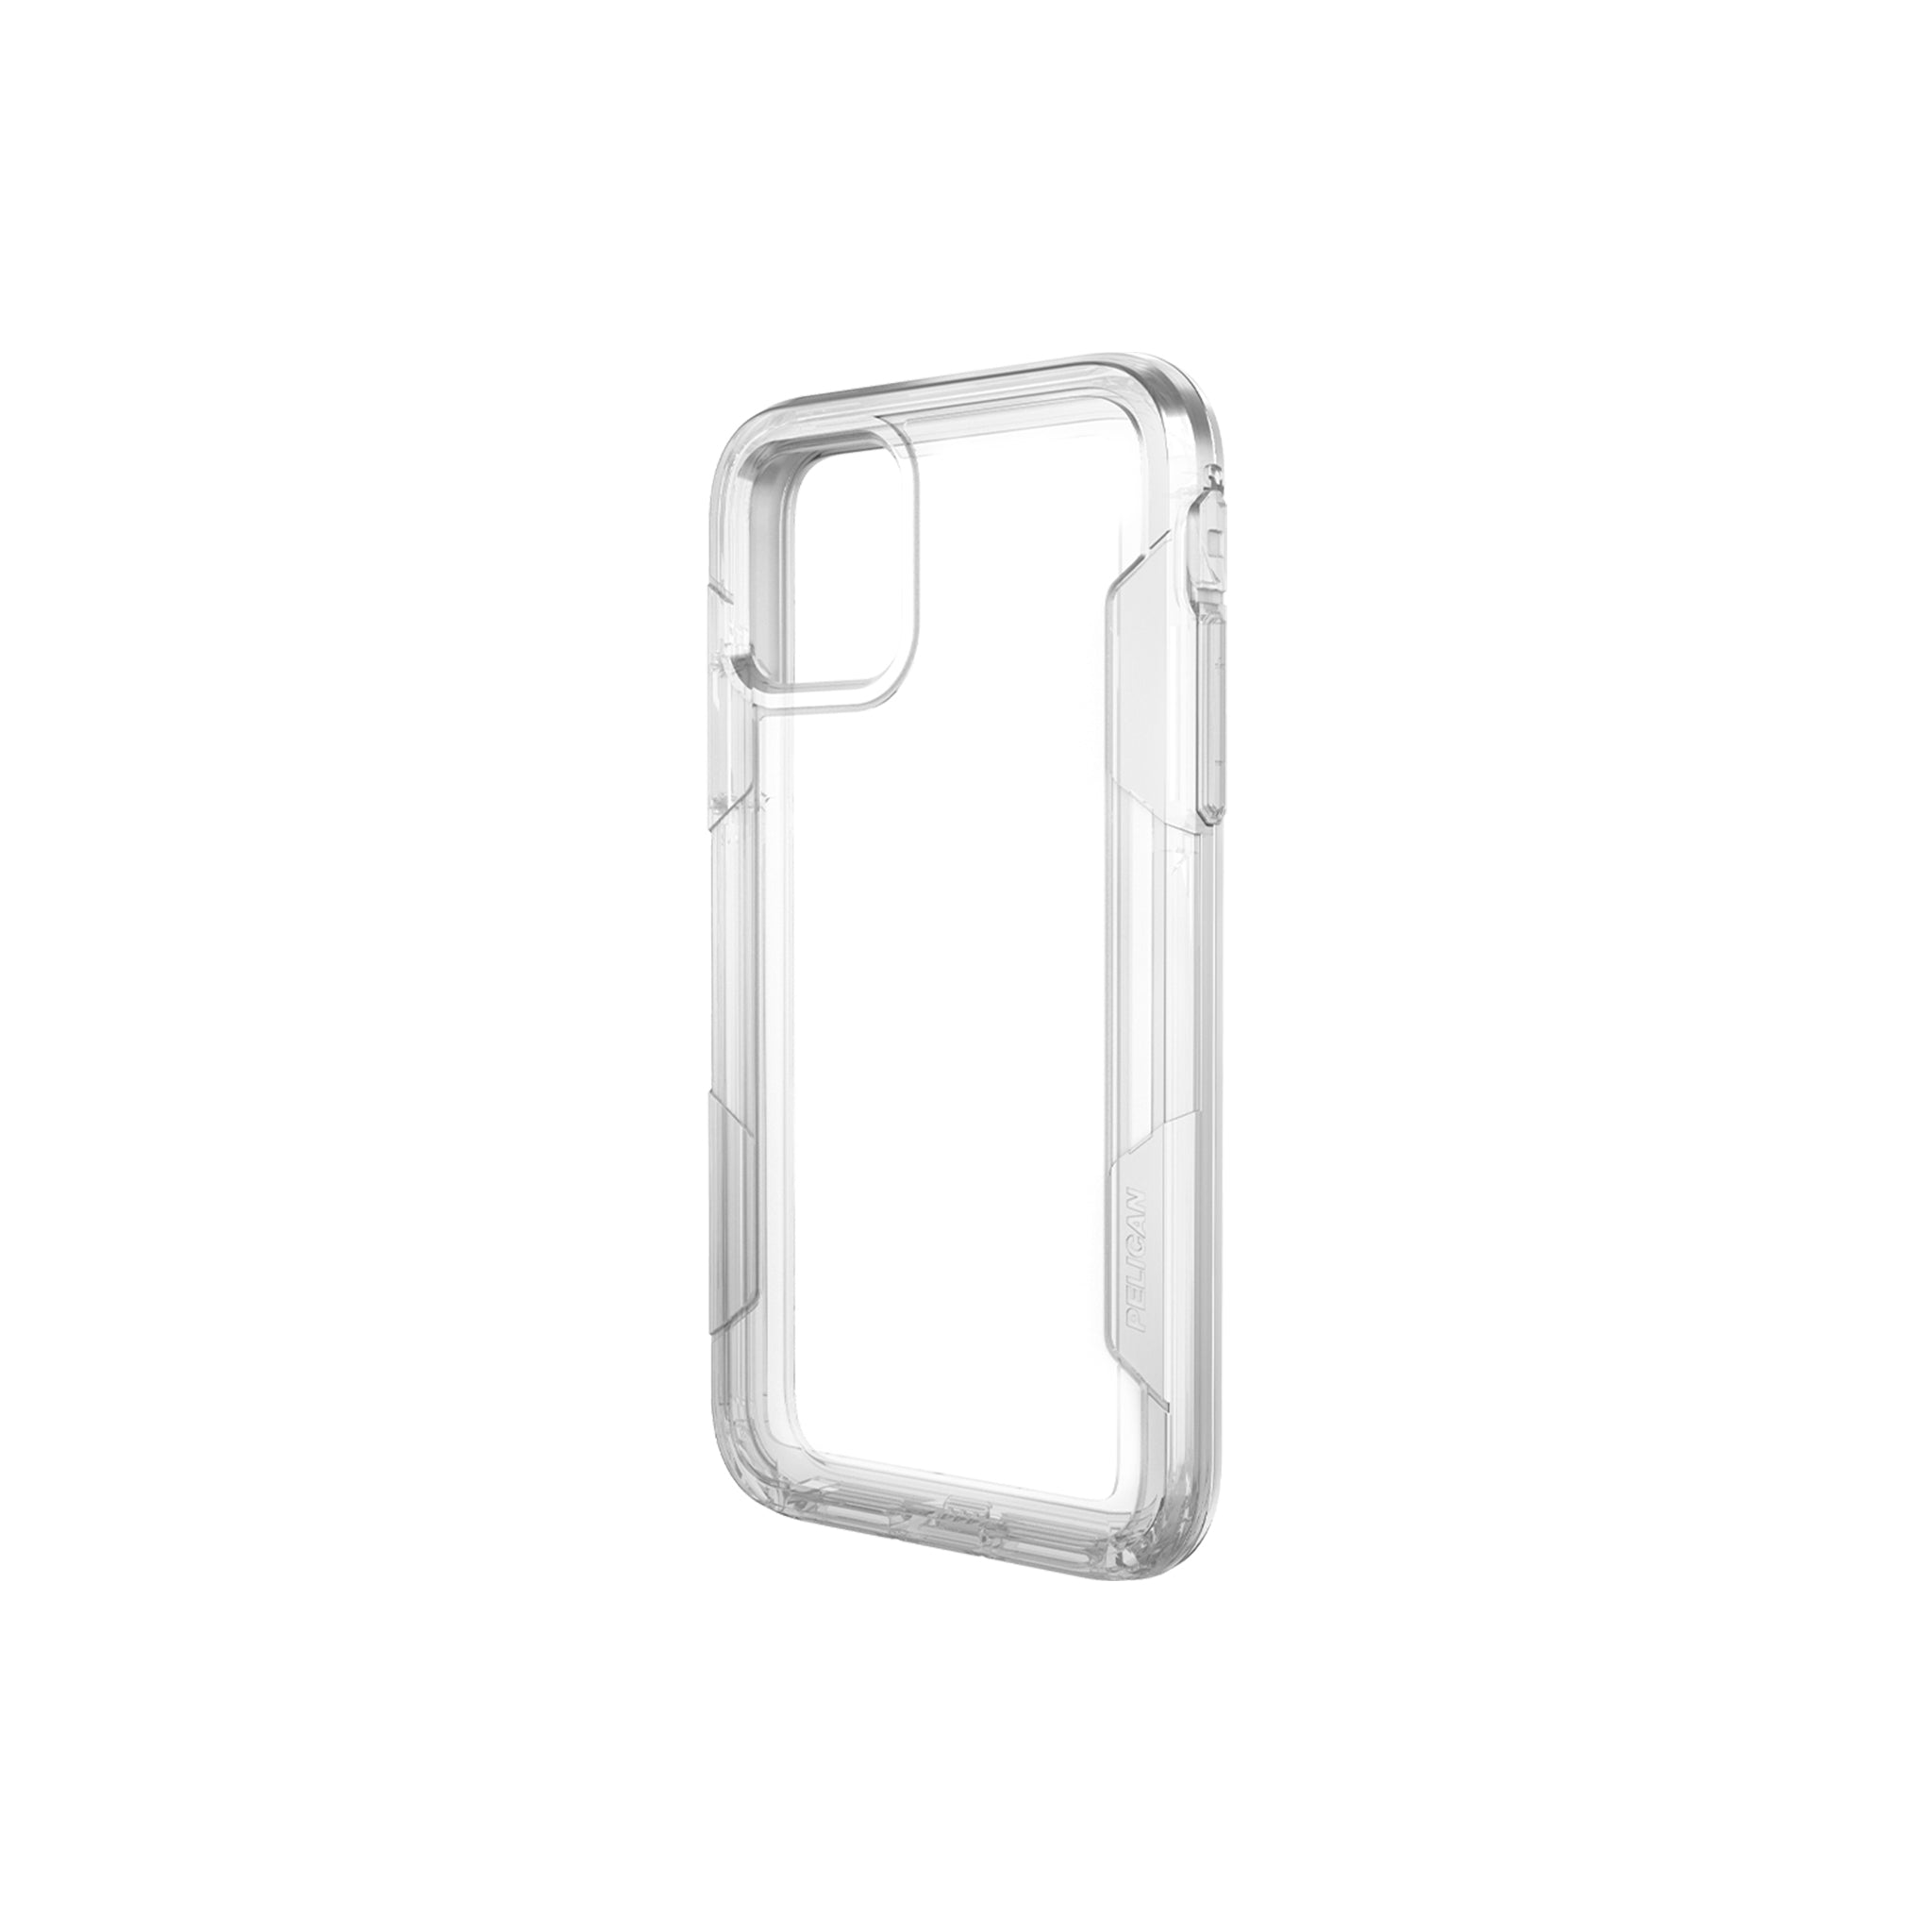 Pelican - Voyager Case For Apple iPhone 11 Pro / Xs / X - Clear